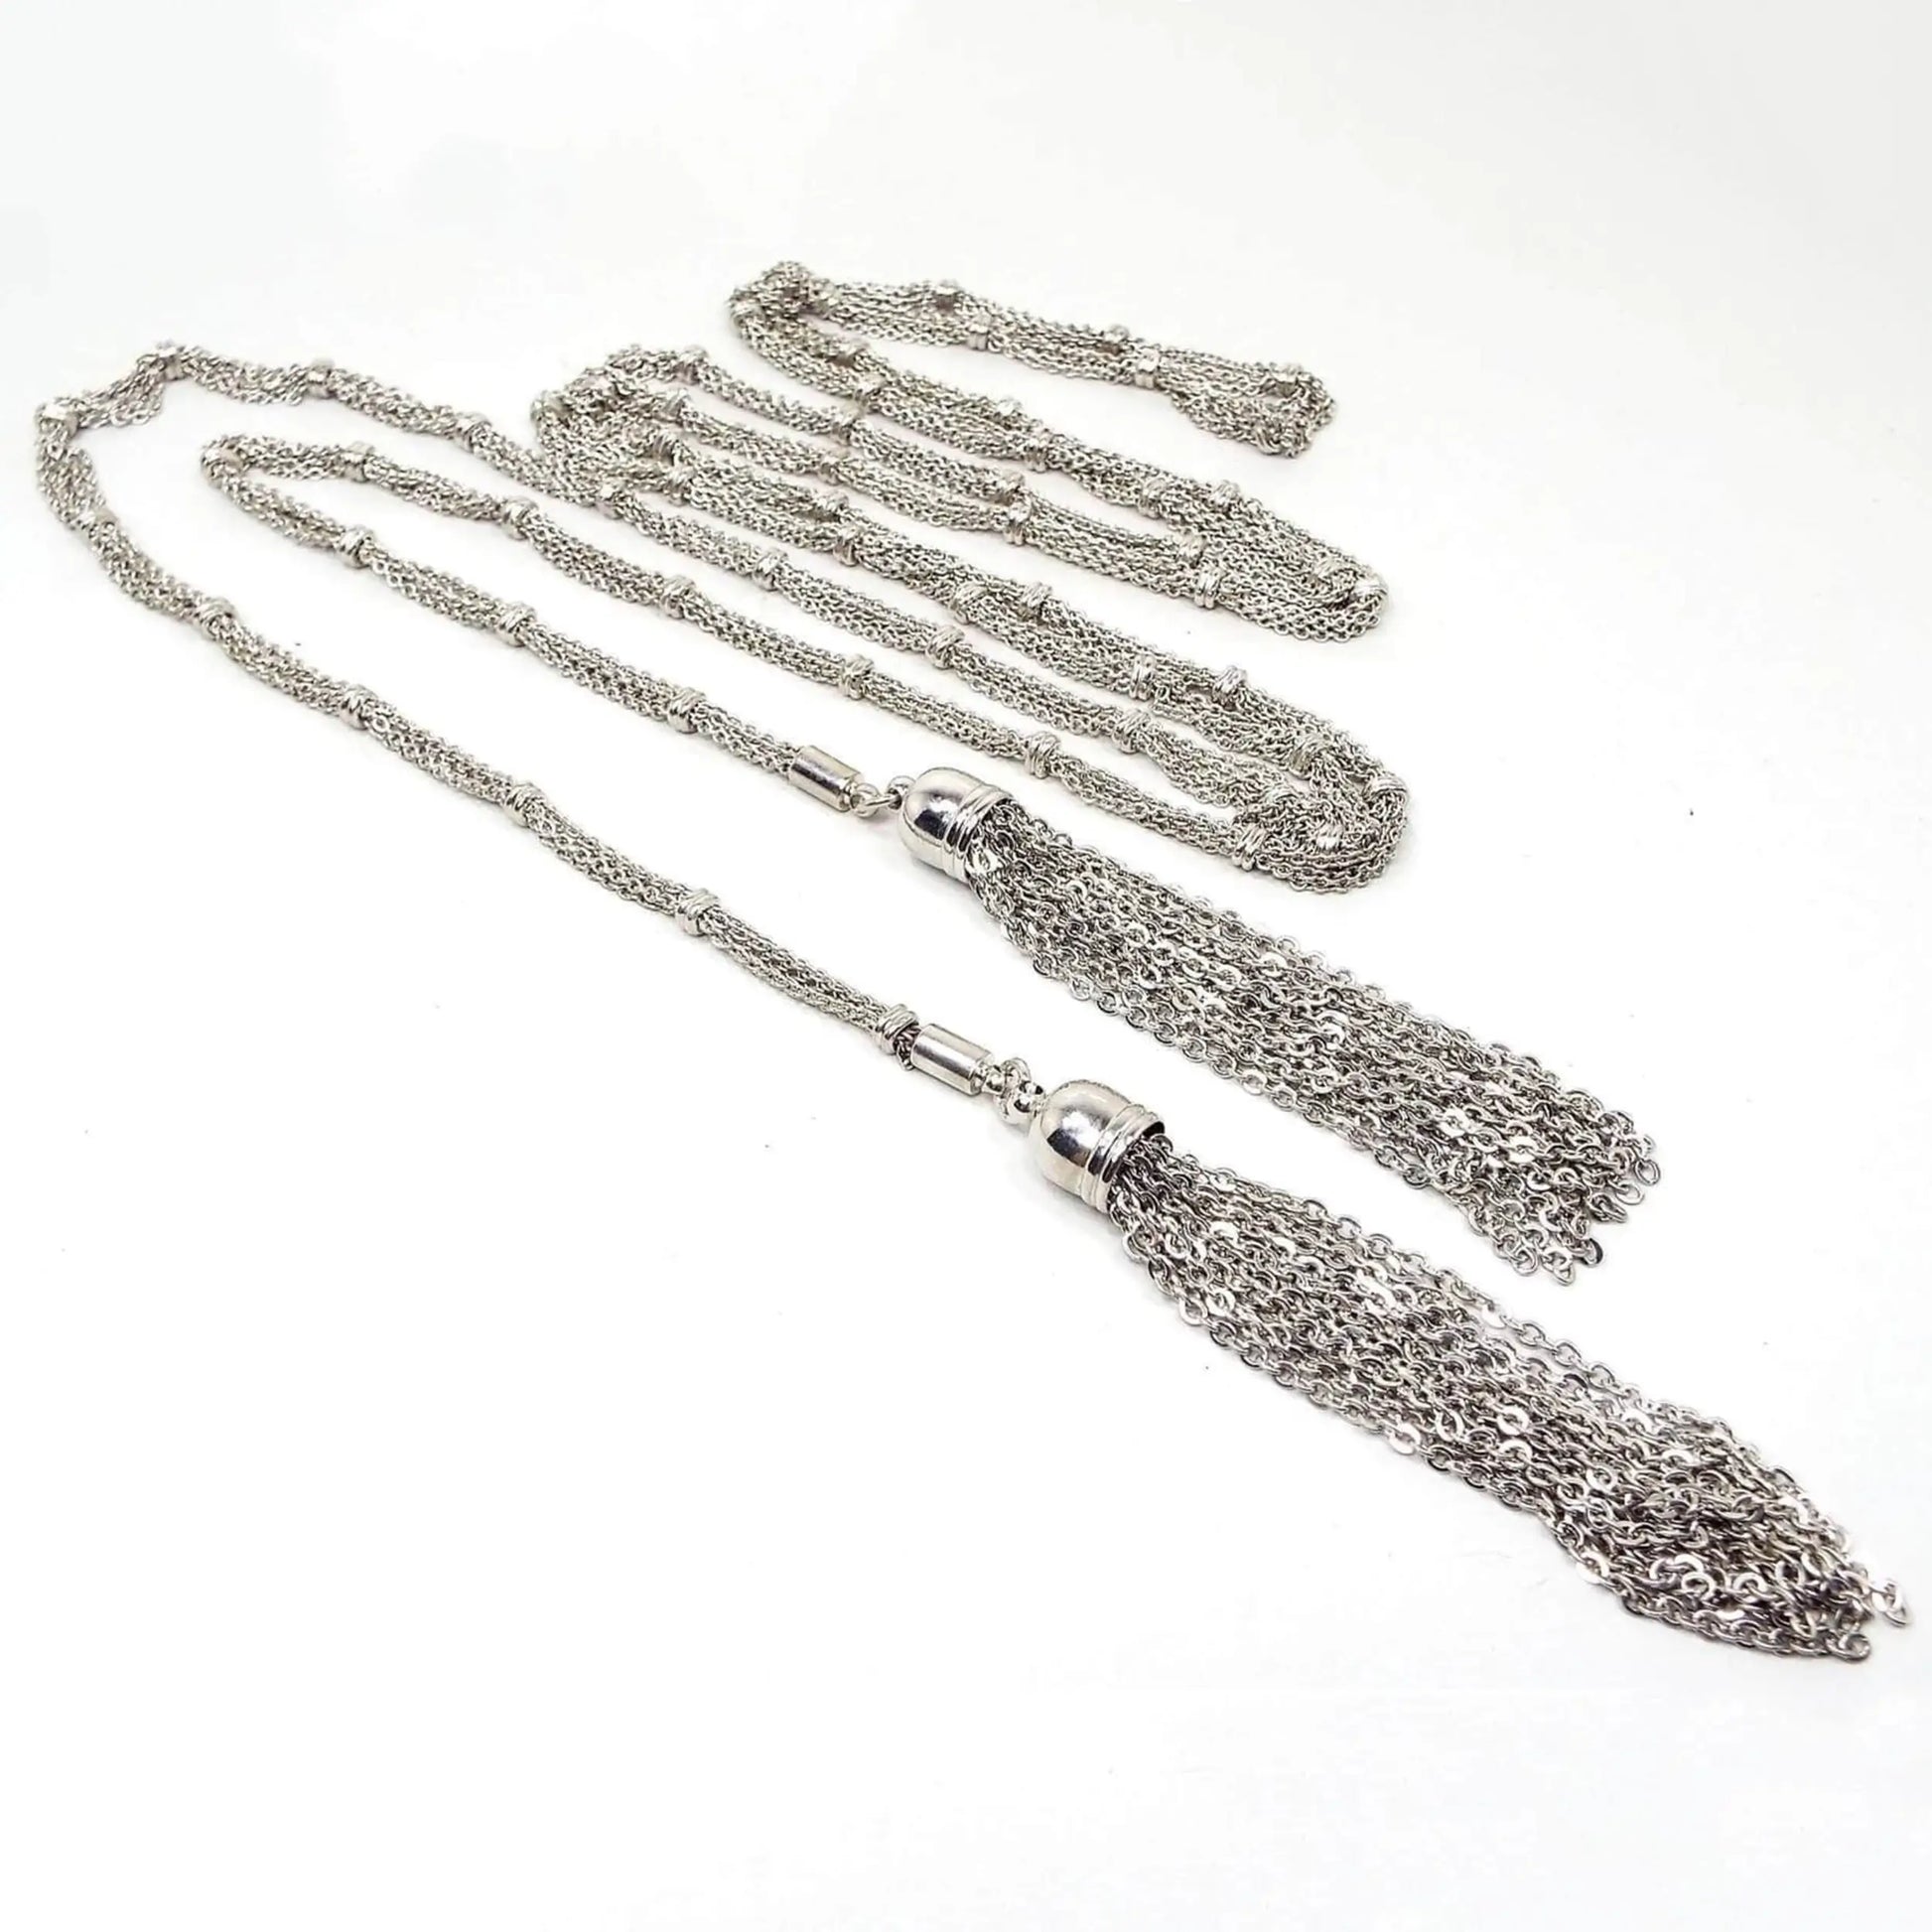 Angled top view of the long Mid Century vintage lariat chain tassel necklace. The metal is silver tone in color. the main part of the necklace has multi strands of oval link cable chain held together by spaced round open beads. The end tassels have a domed cap and several strands of round link rolo chain dangling from each end. There is no clasp as you wrap the necklace around yourself lariat style.